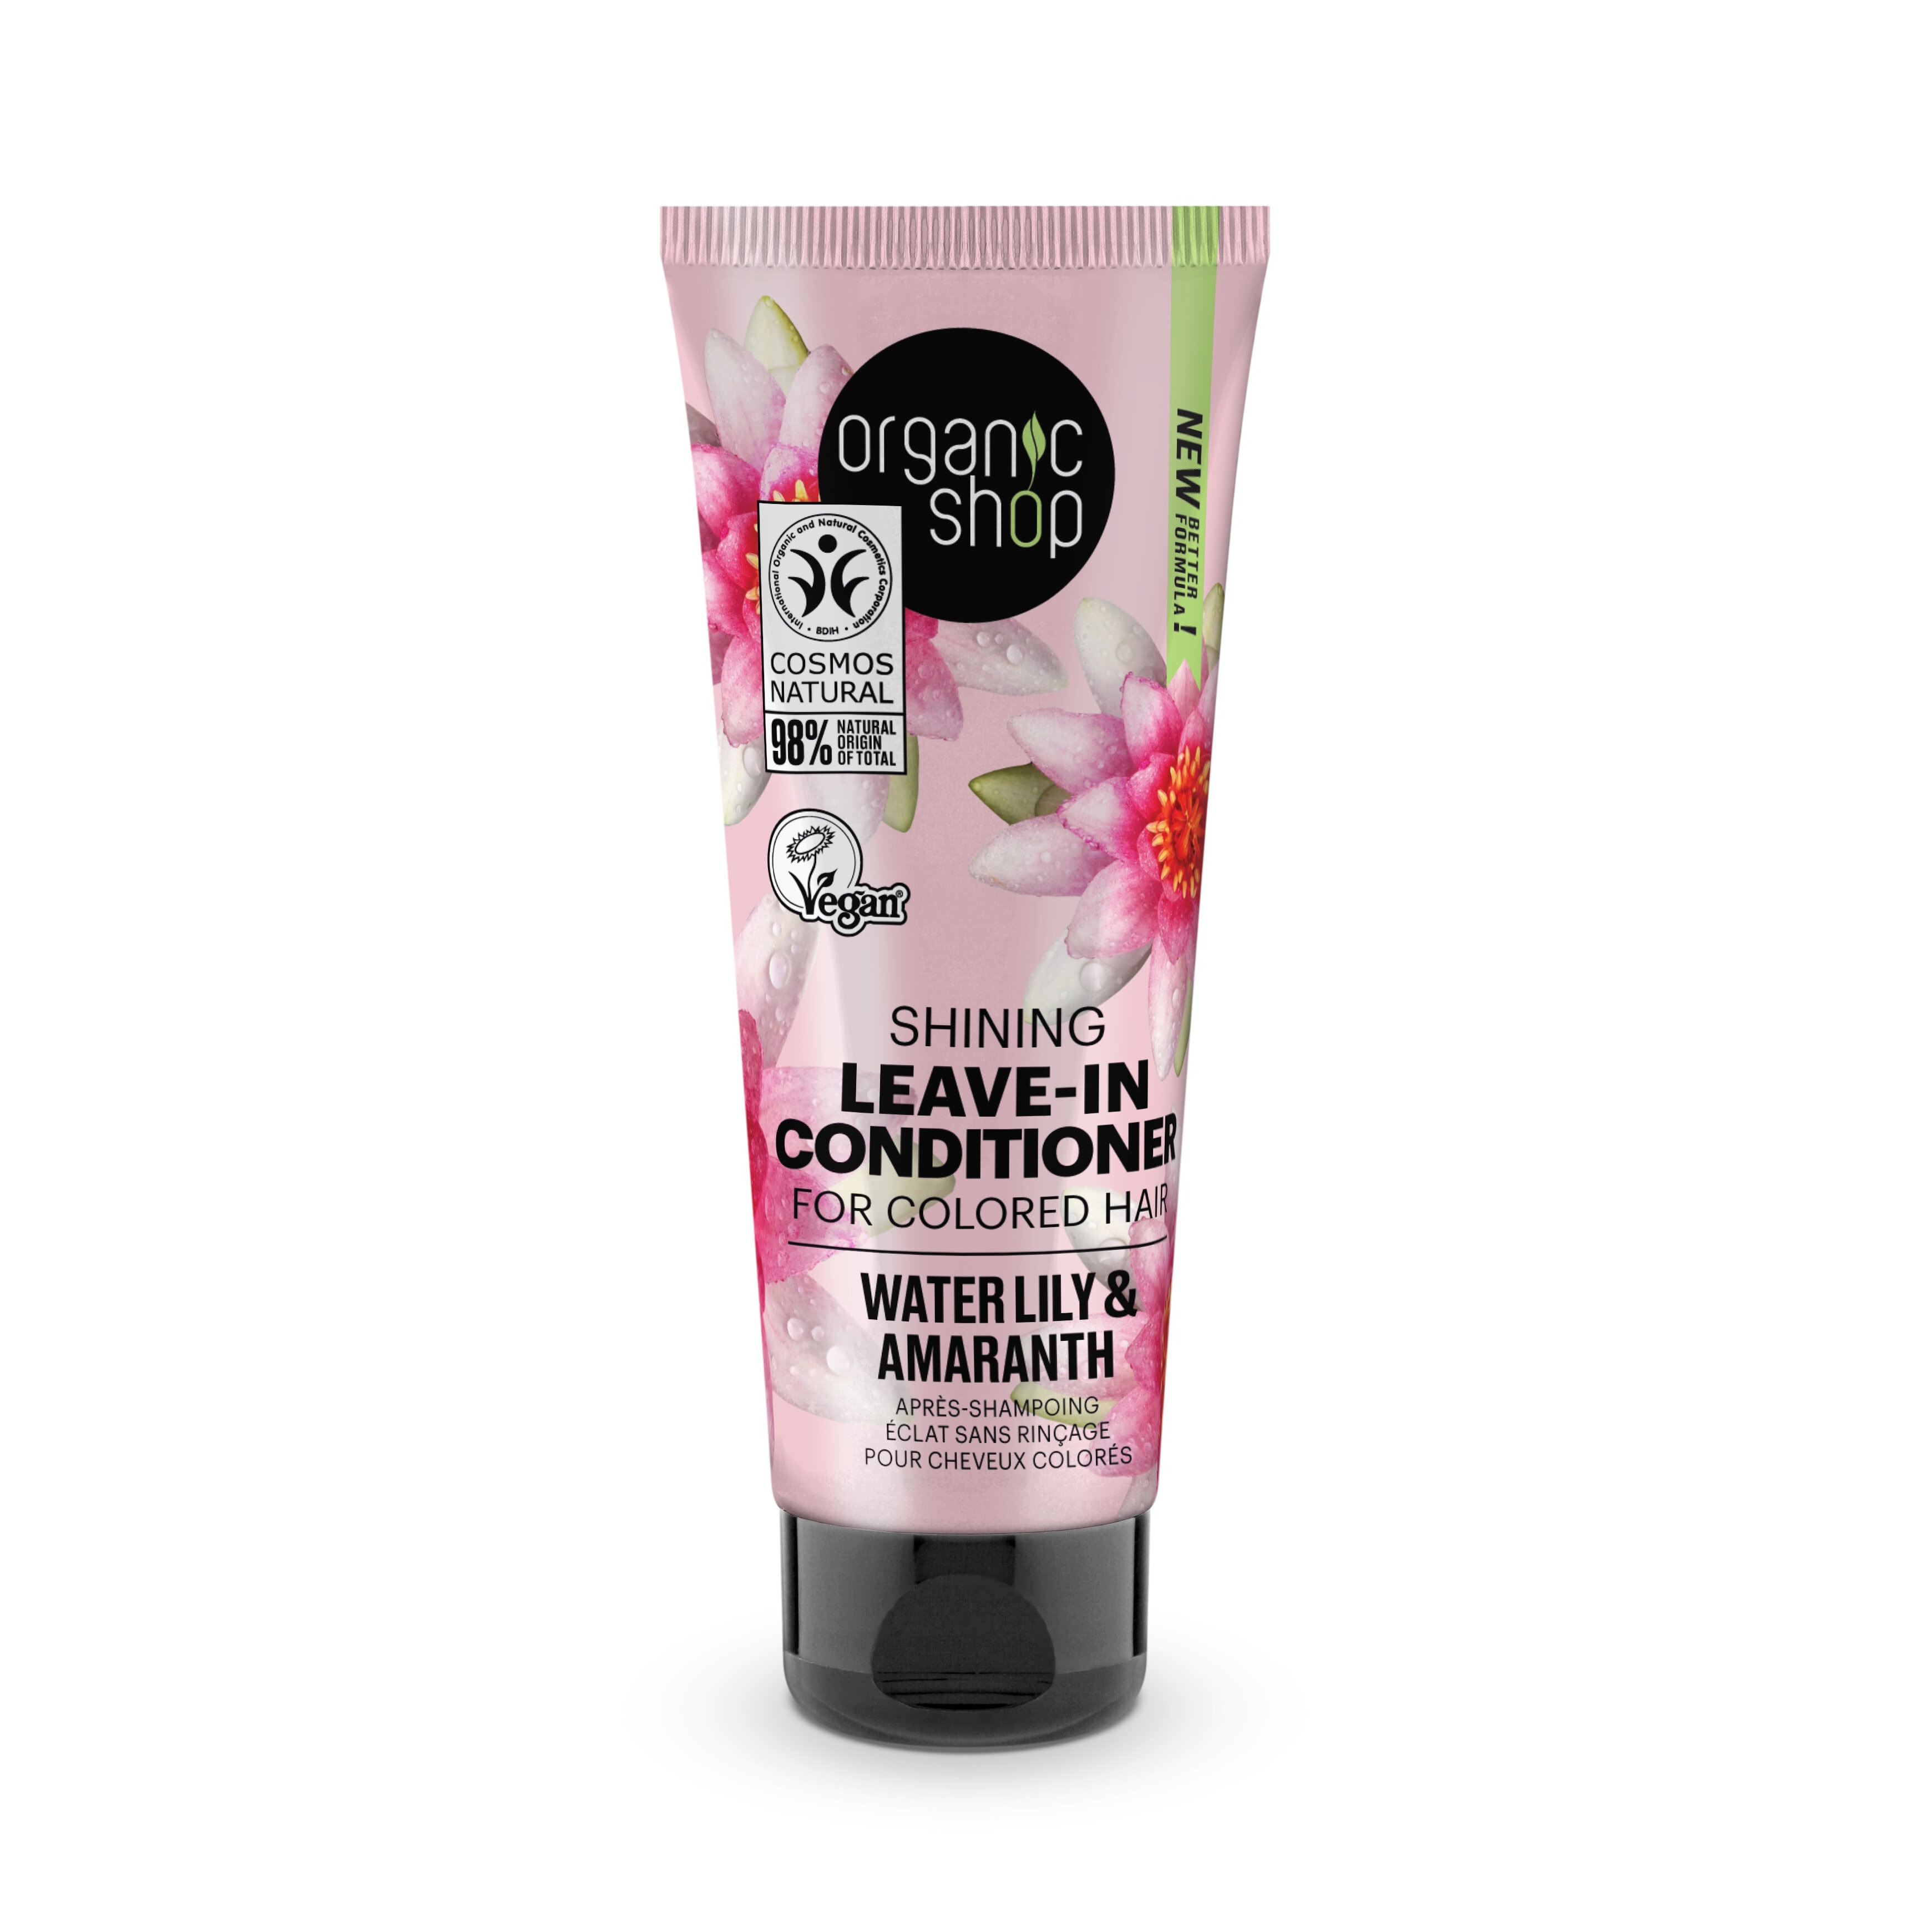 Leave-In Conditioner Lily and Amaranth 75 ml